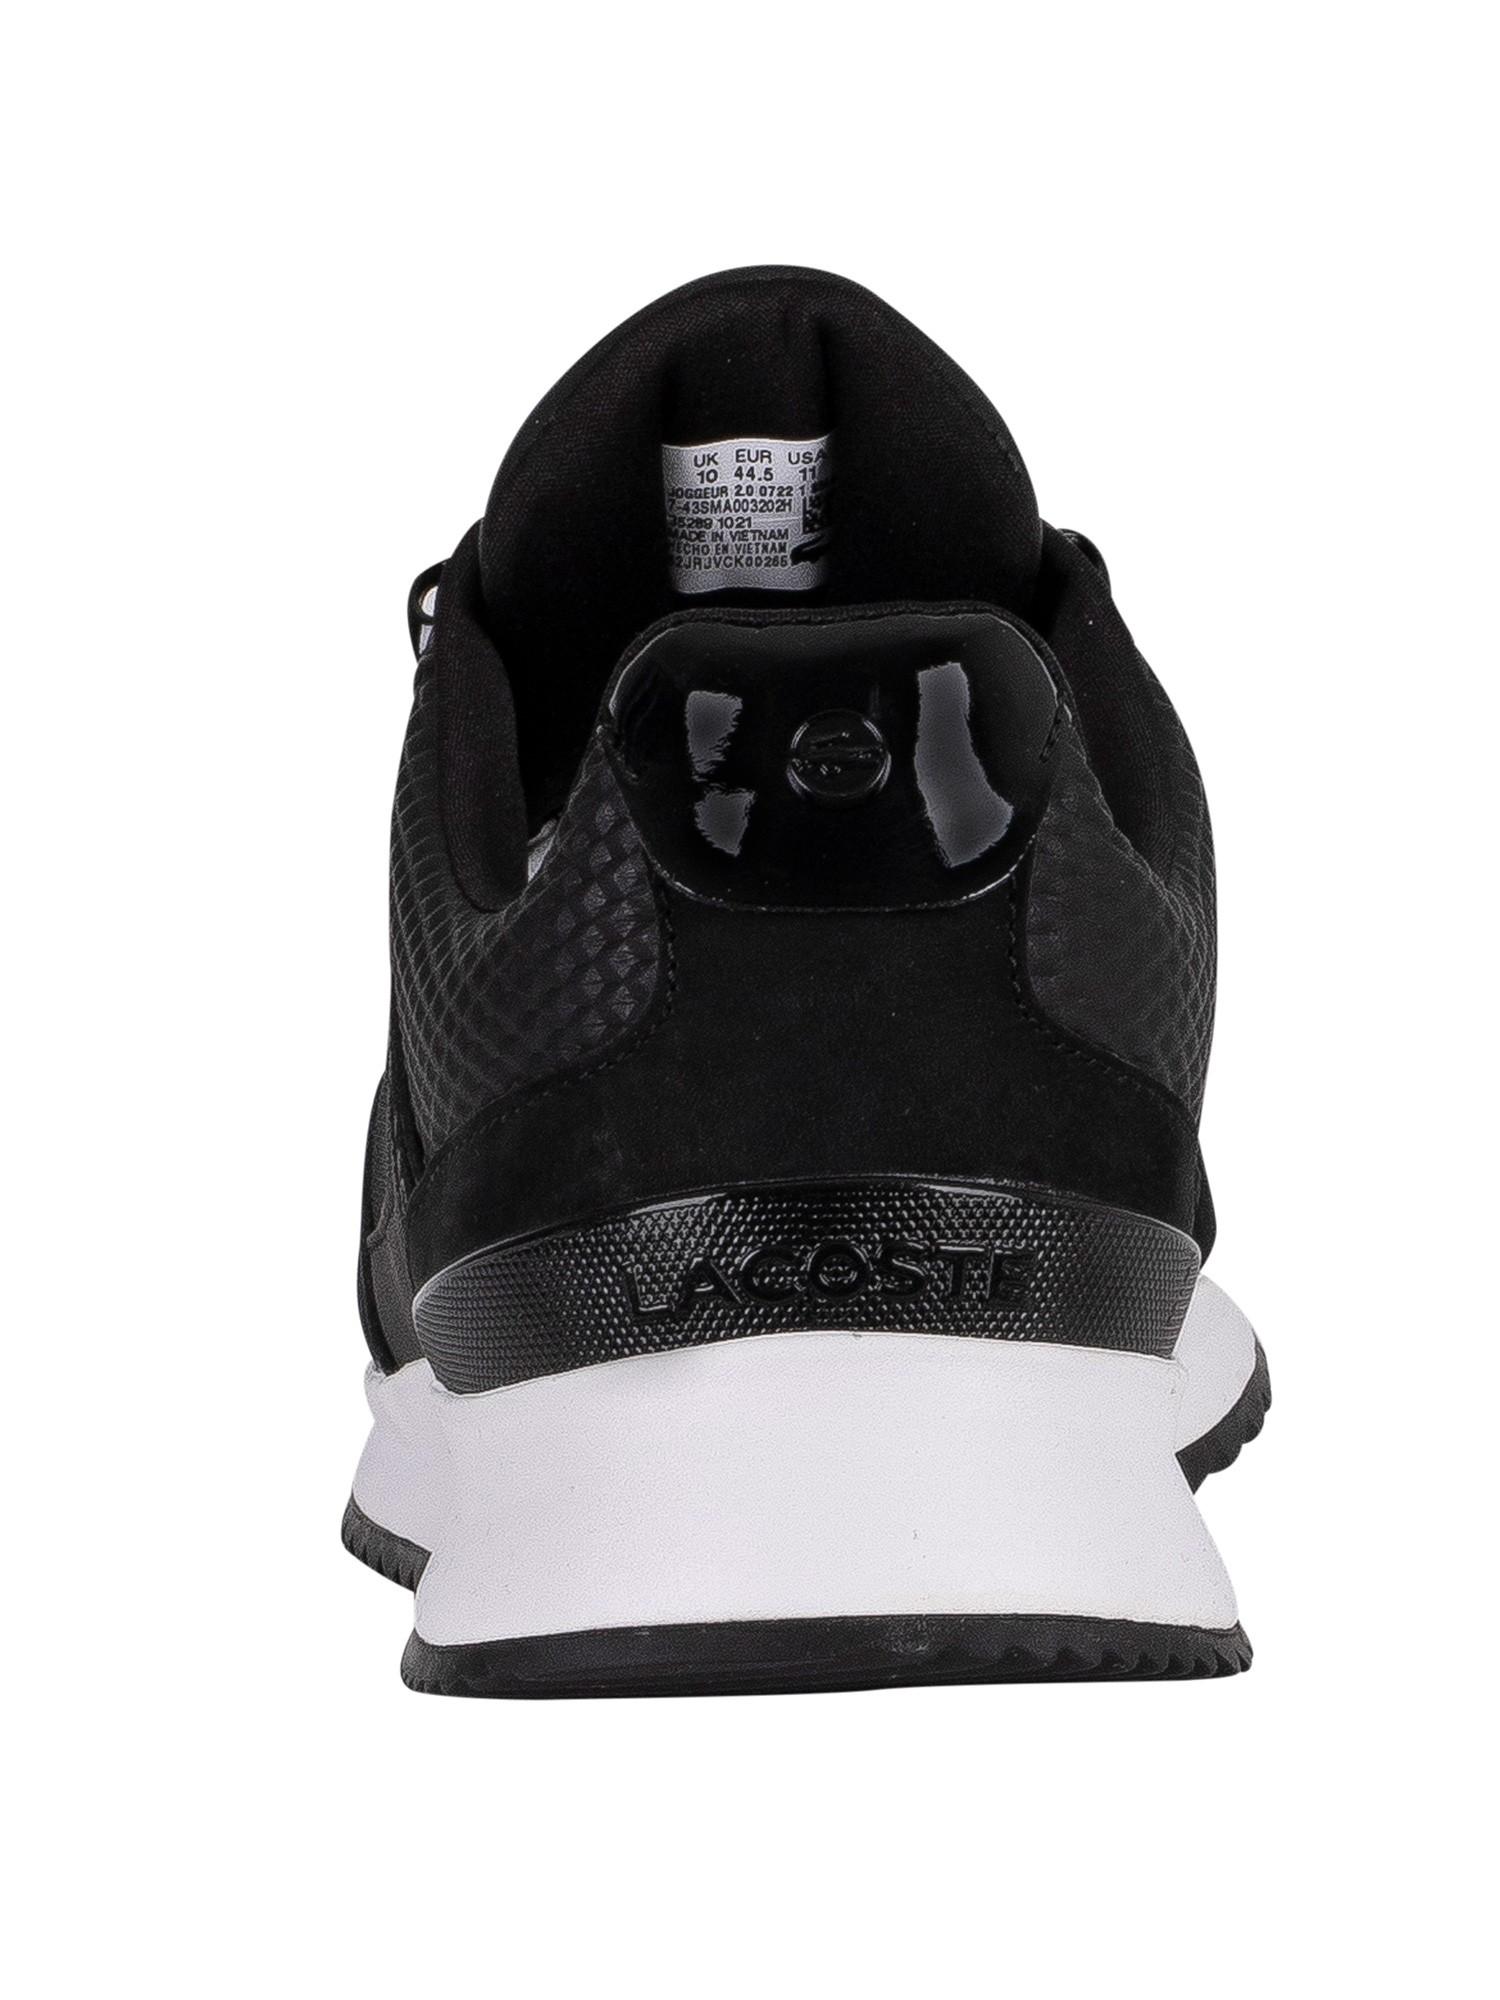 Lacoste Joggeur 2.0 0722 1 Sma Leather Trainers in Black/Black (Black) for  Men - Save 59% | Lyst